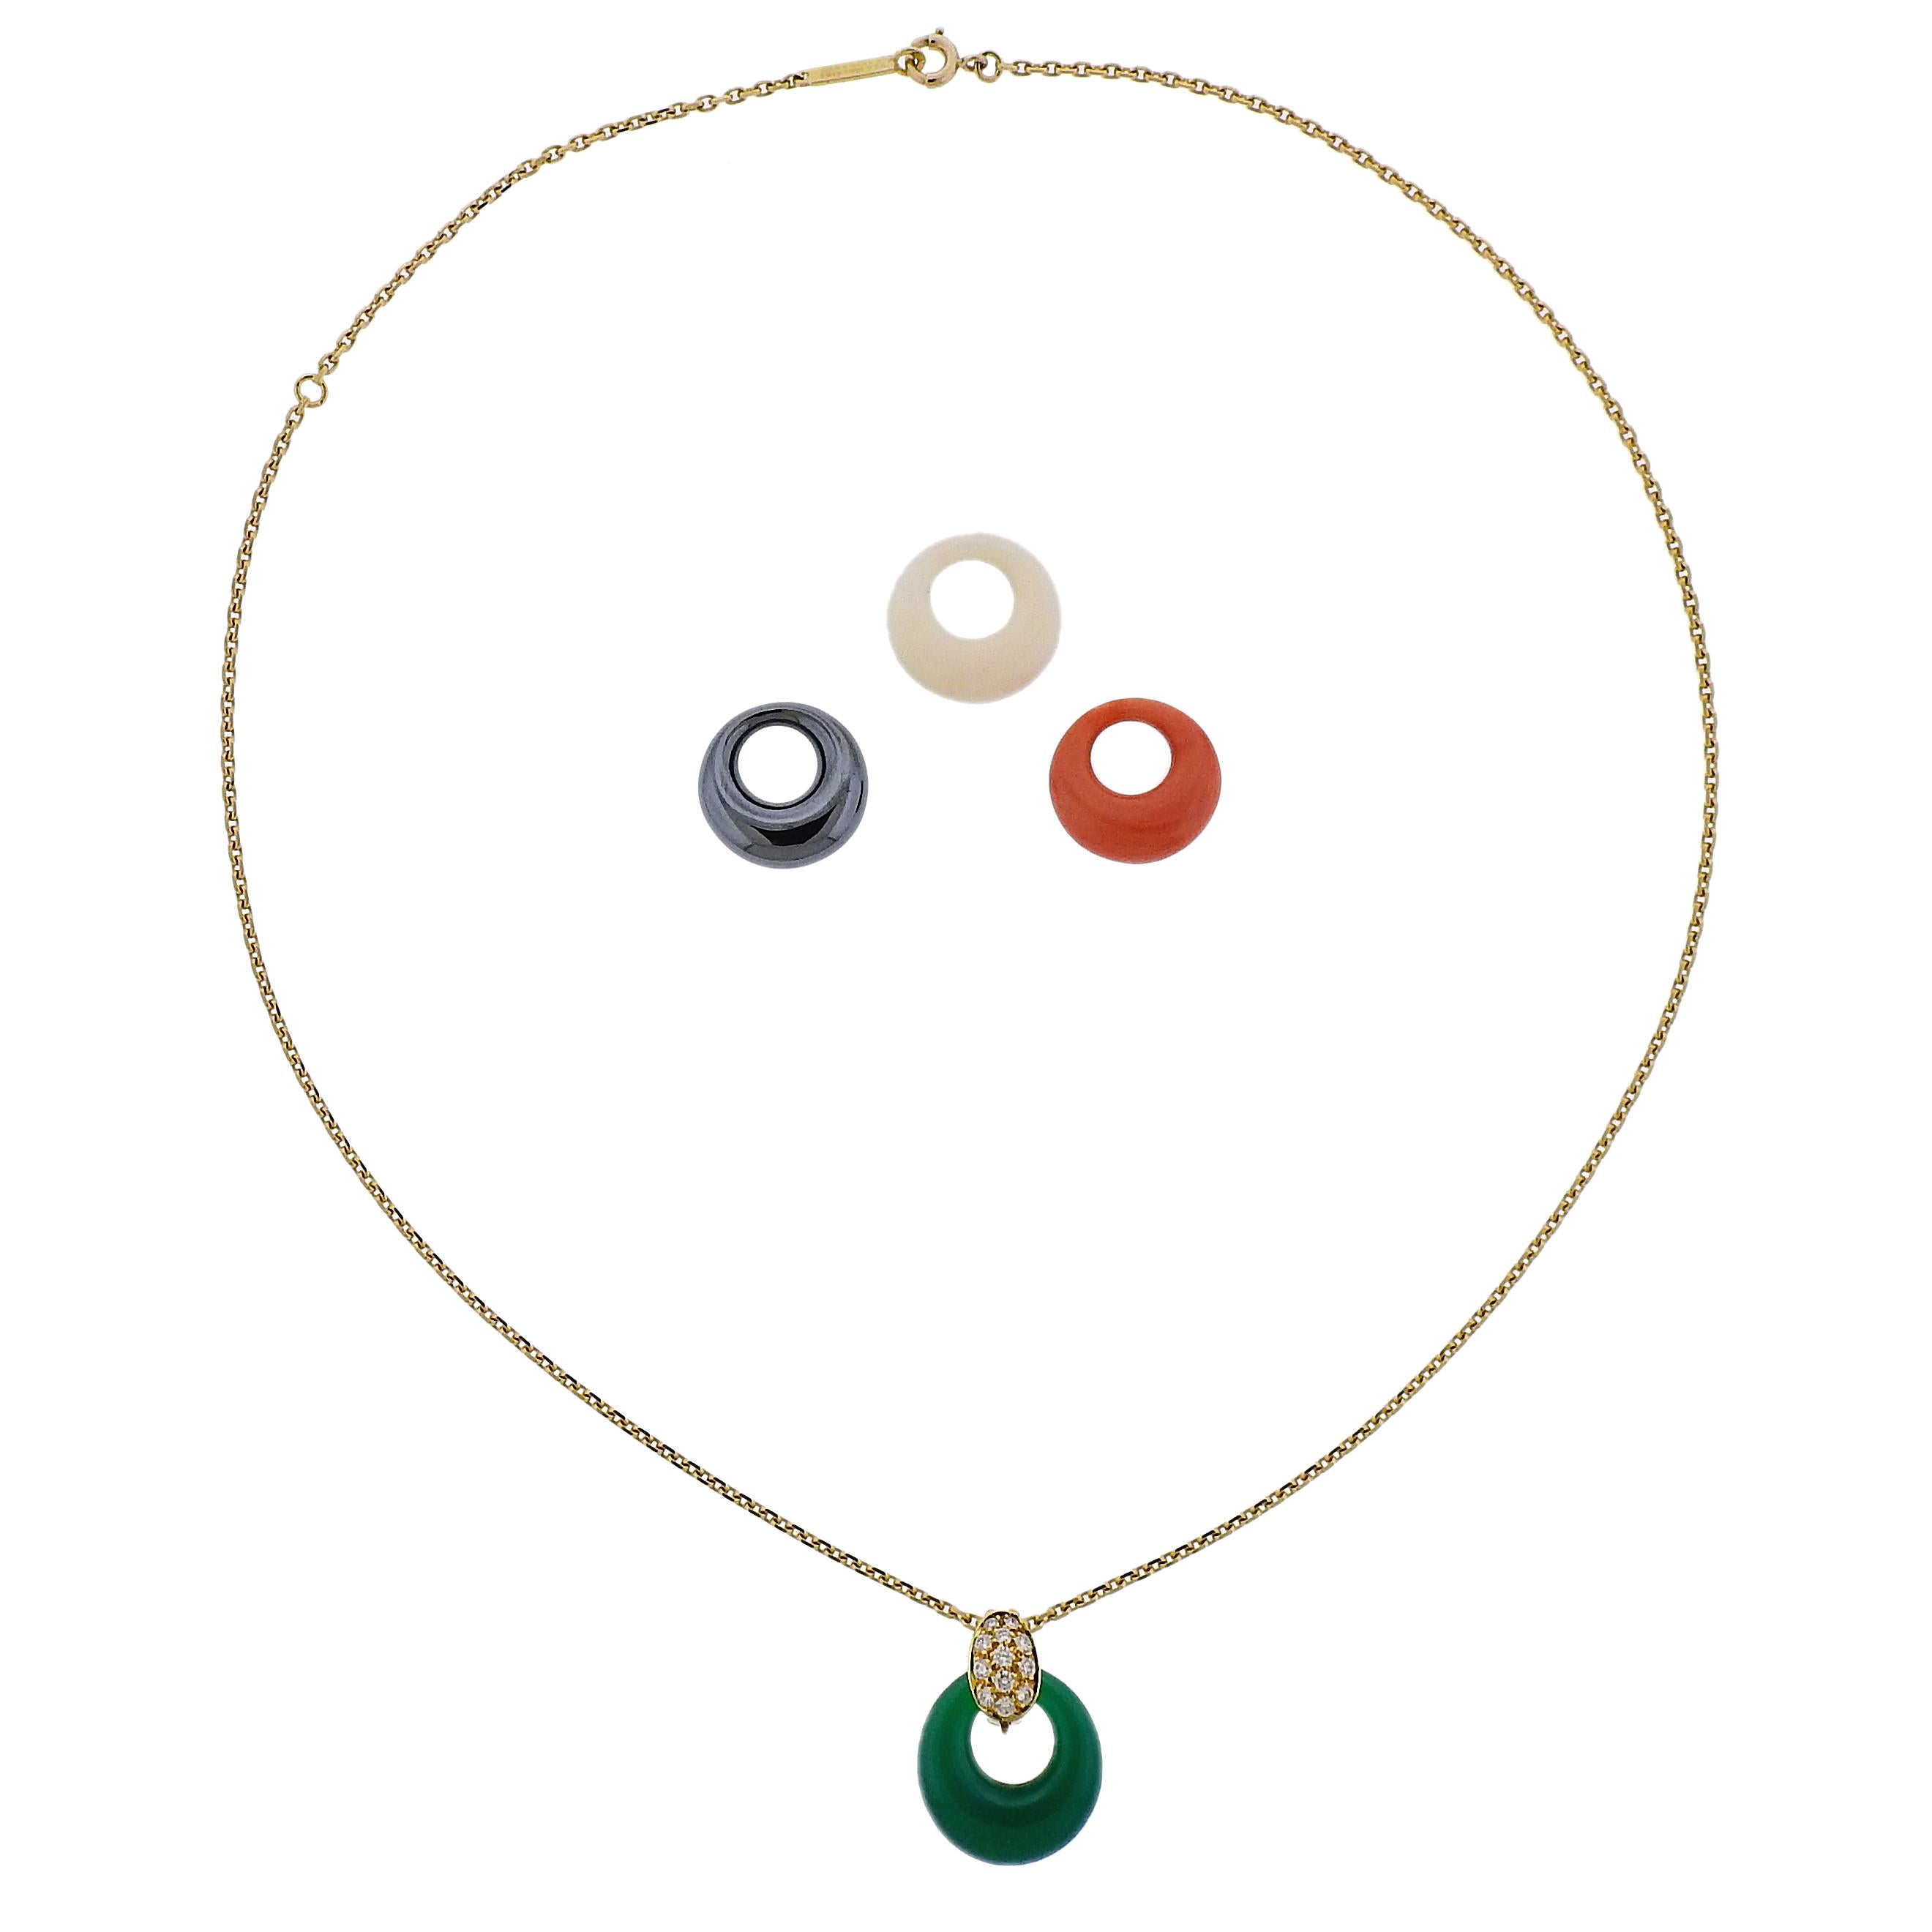 Vintage 18k yellow gold necklace by Van Cleef & Arpels, featuring interchangeable pendant. Set with approx. 0.20ctw in FG/VVS diamonds and three gemstones: coral, chrysoprase and hematite. Necklace is 18